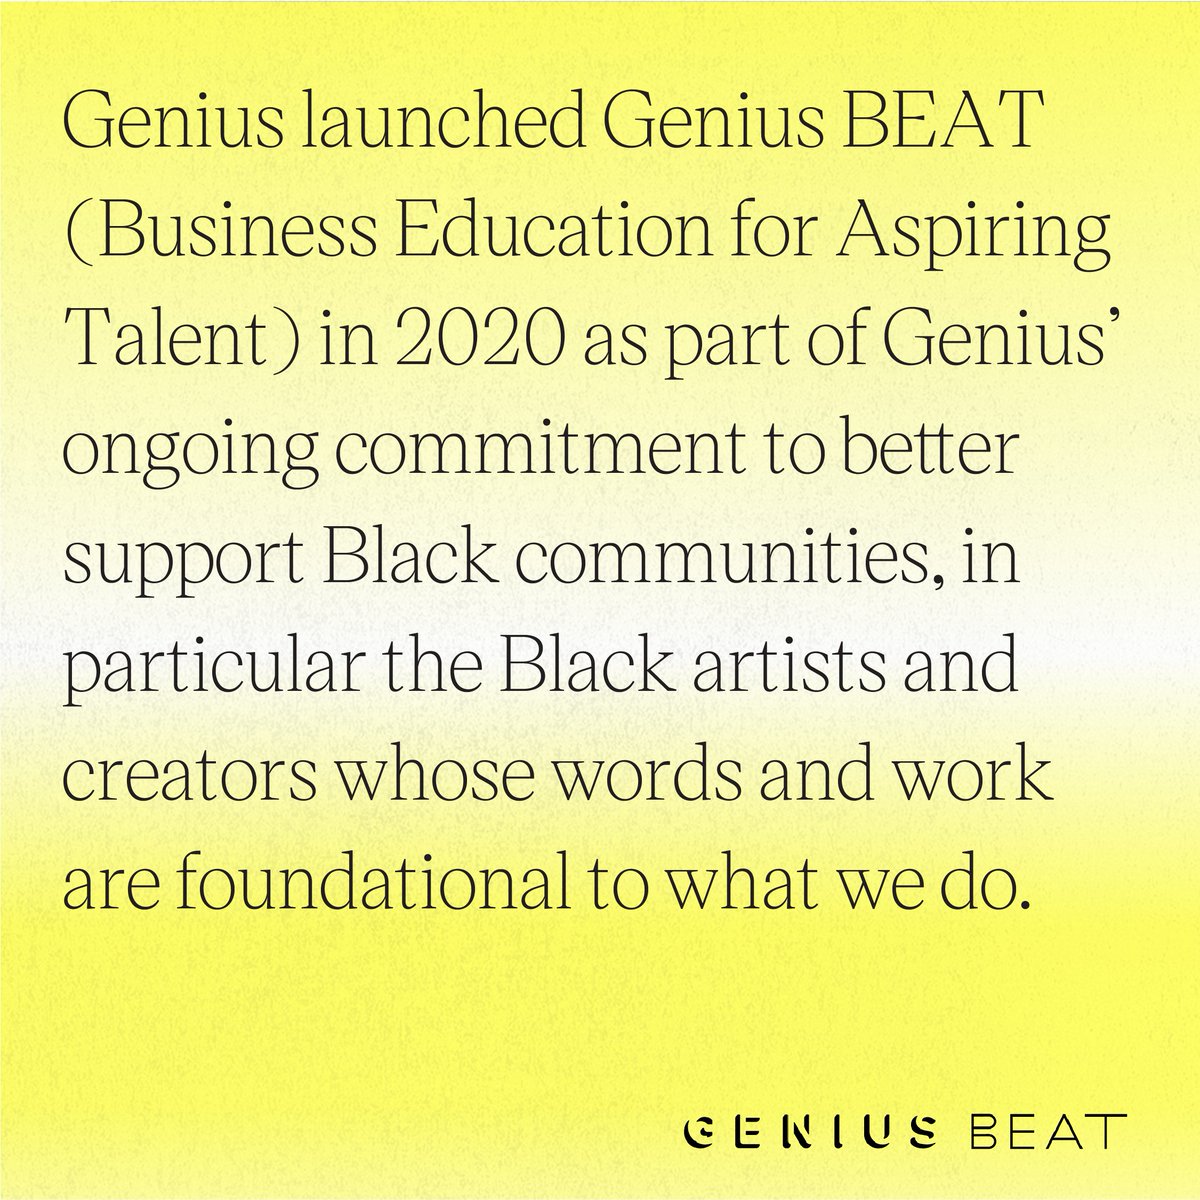 we're talking samples, covers, fair use, and more in our next #geniusBEAT seminar on april 19th 💿

if you're an artist hoping to learn more about the music industry, register here: so.genius.com/ldVekUK